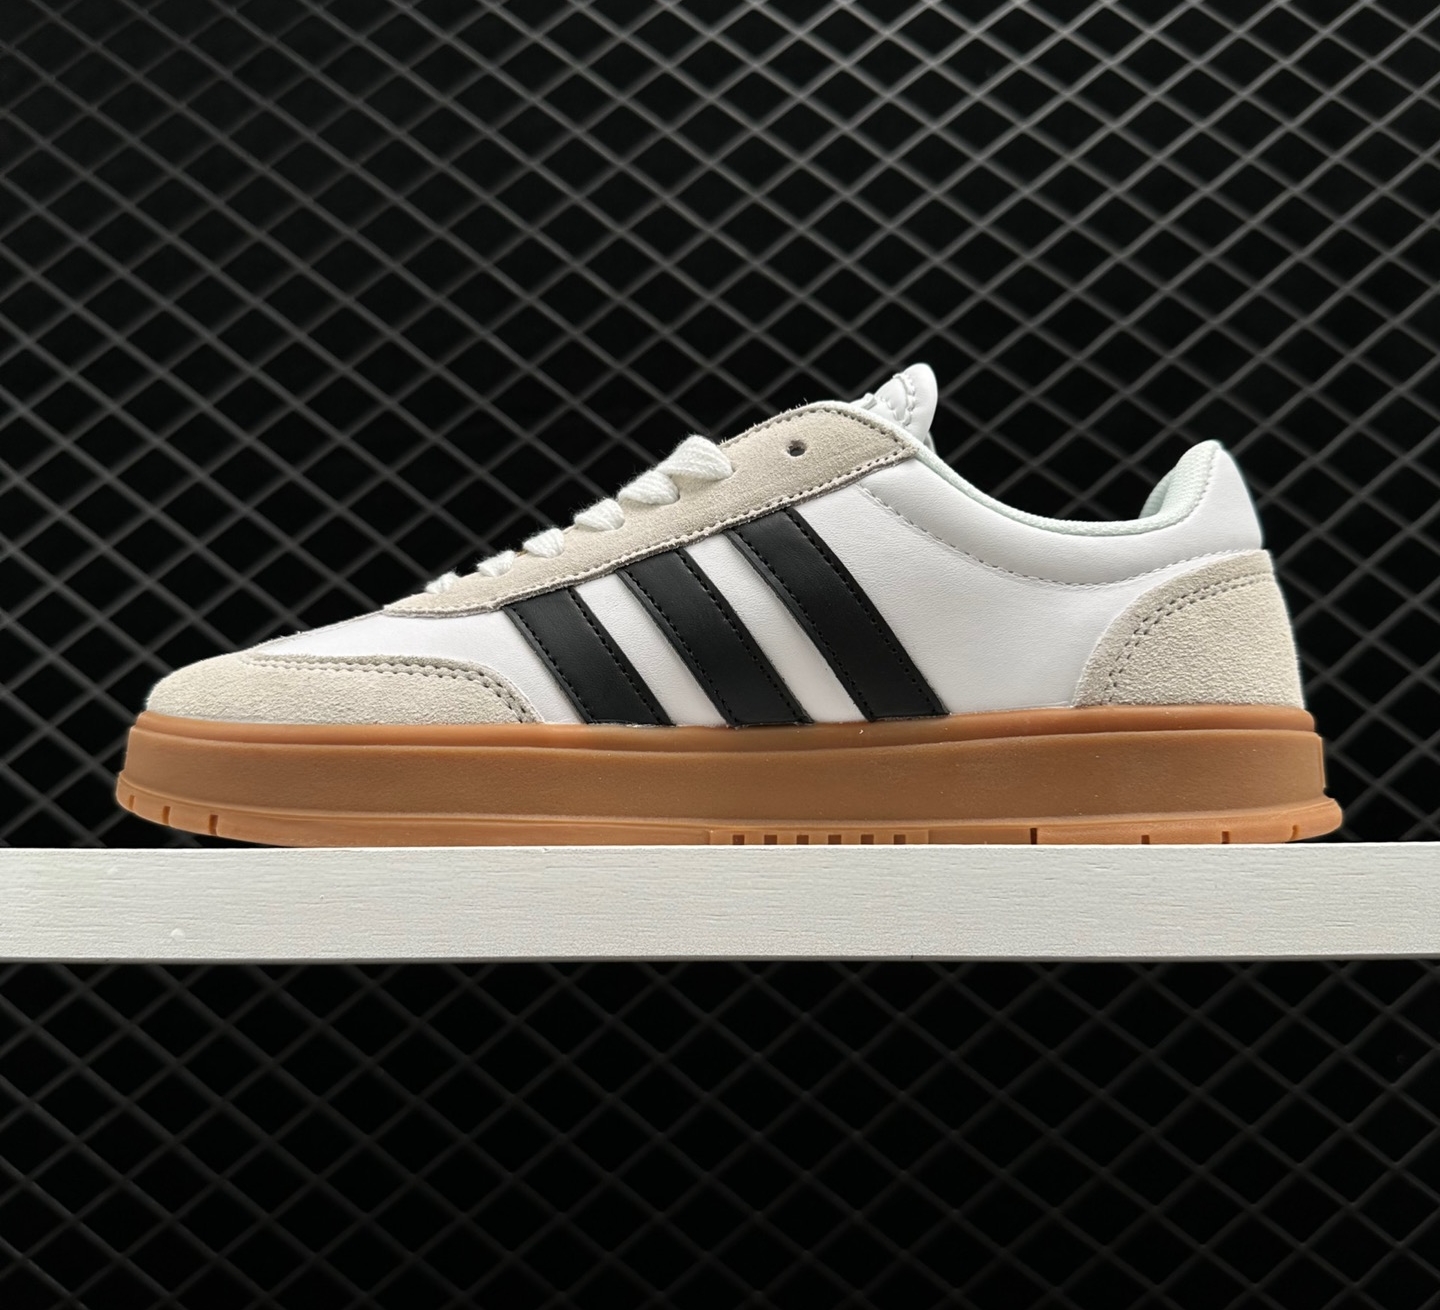 Adidas Neo Gradas White Gray Black Unisex FW3378 - Stylish and Classic Footwear with Unisex Appeal